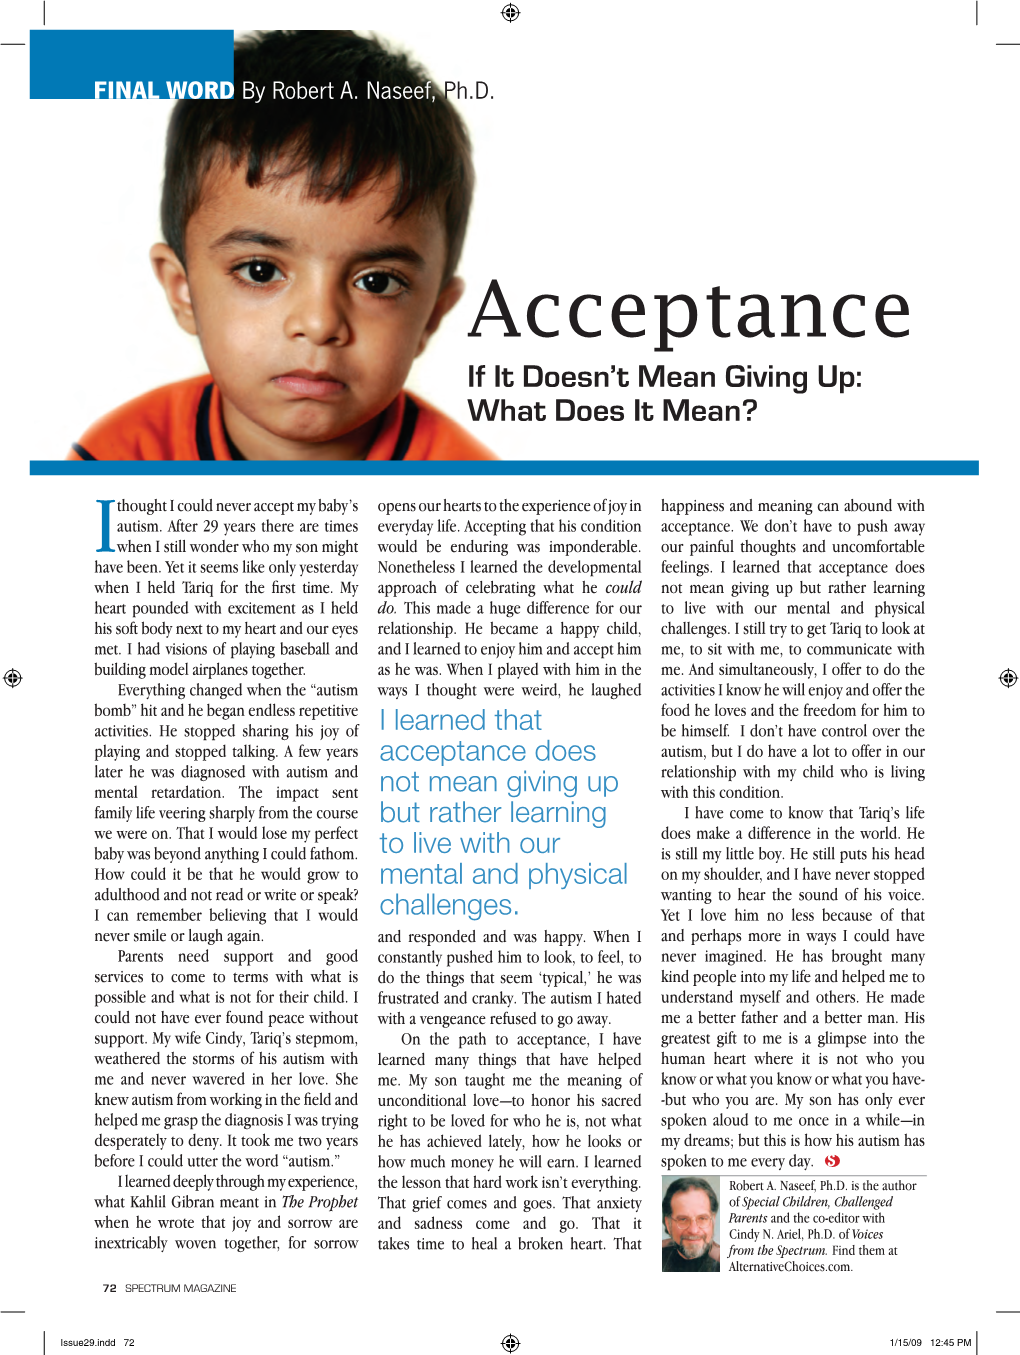 Acceptance If It Doesn’T Mean Giving Up: What Does It Mean?